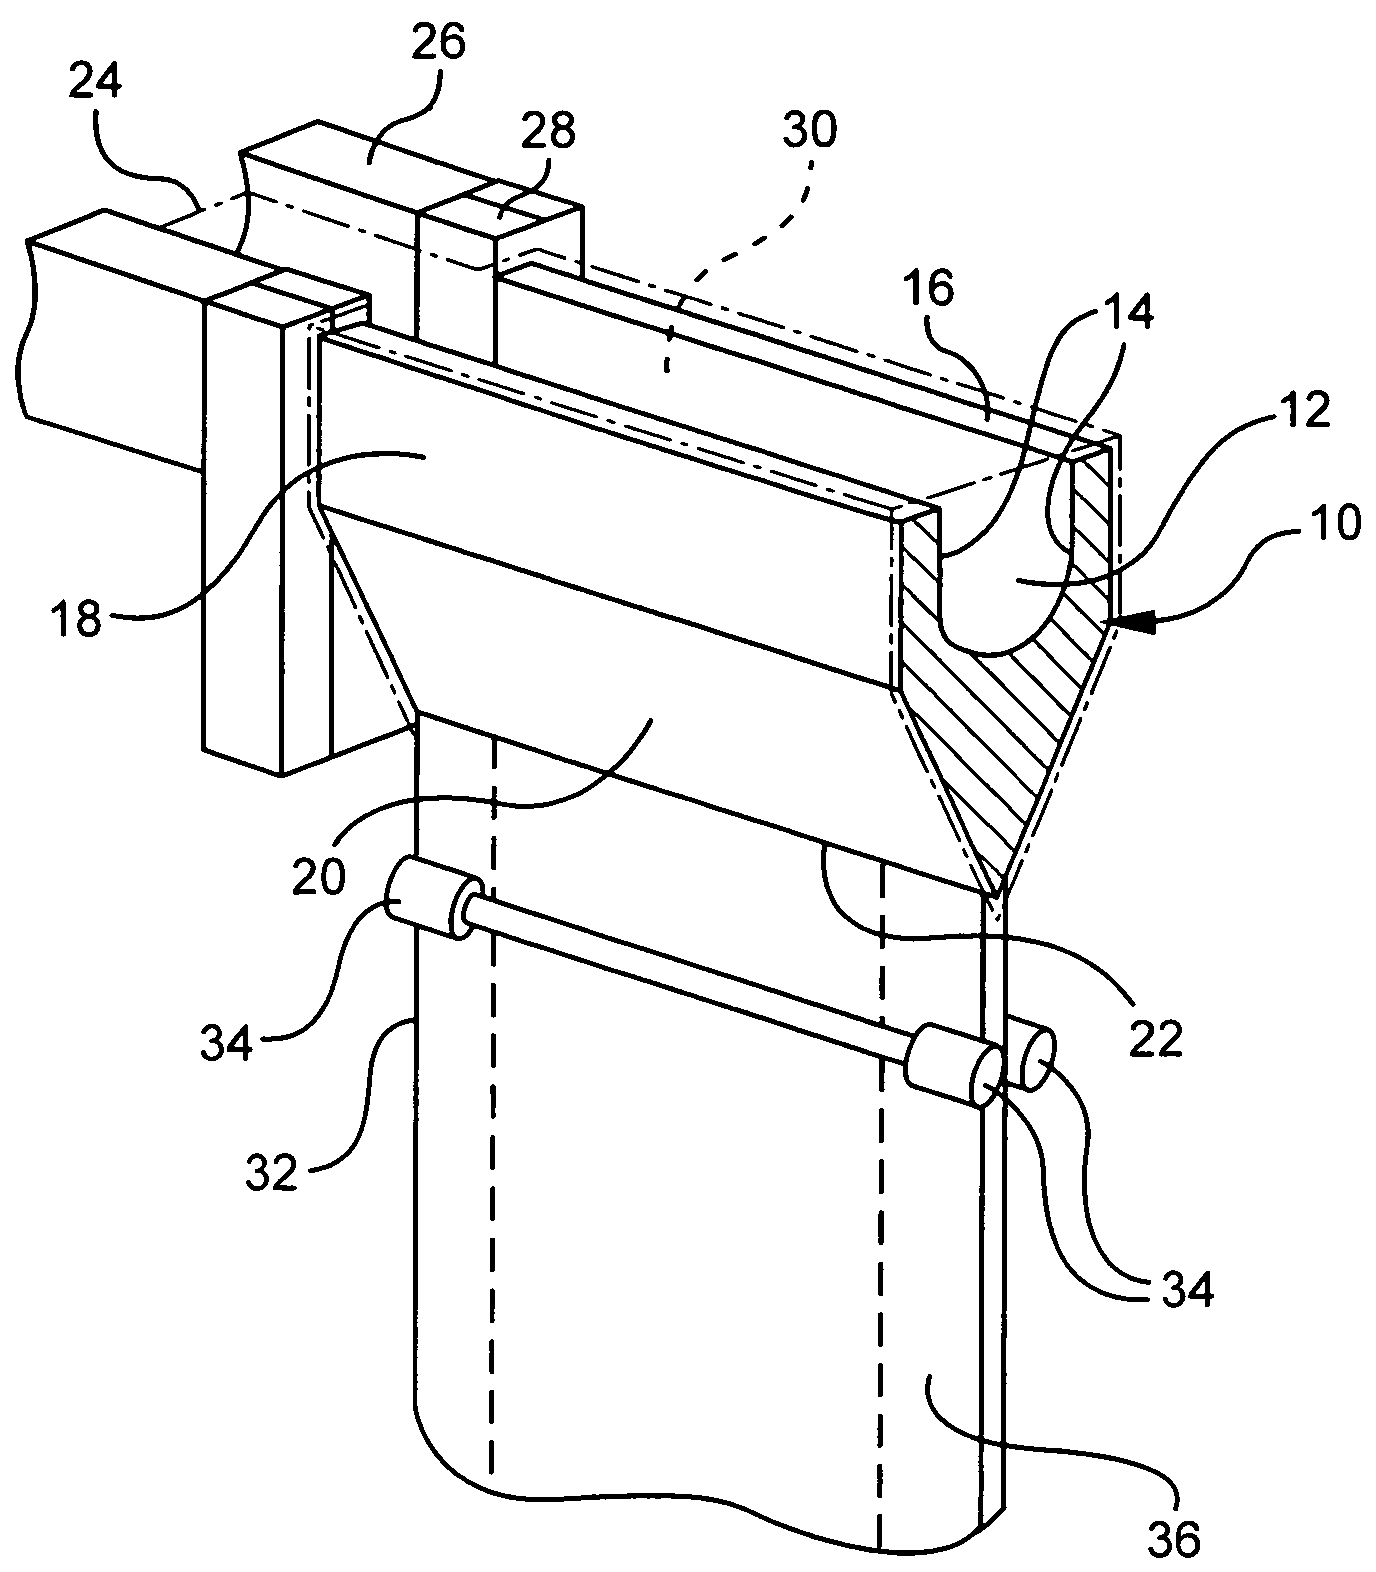 Method of minimizing distortion in a sheet of glass